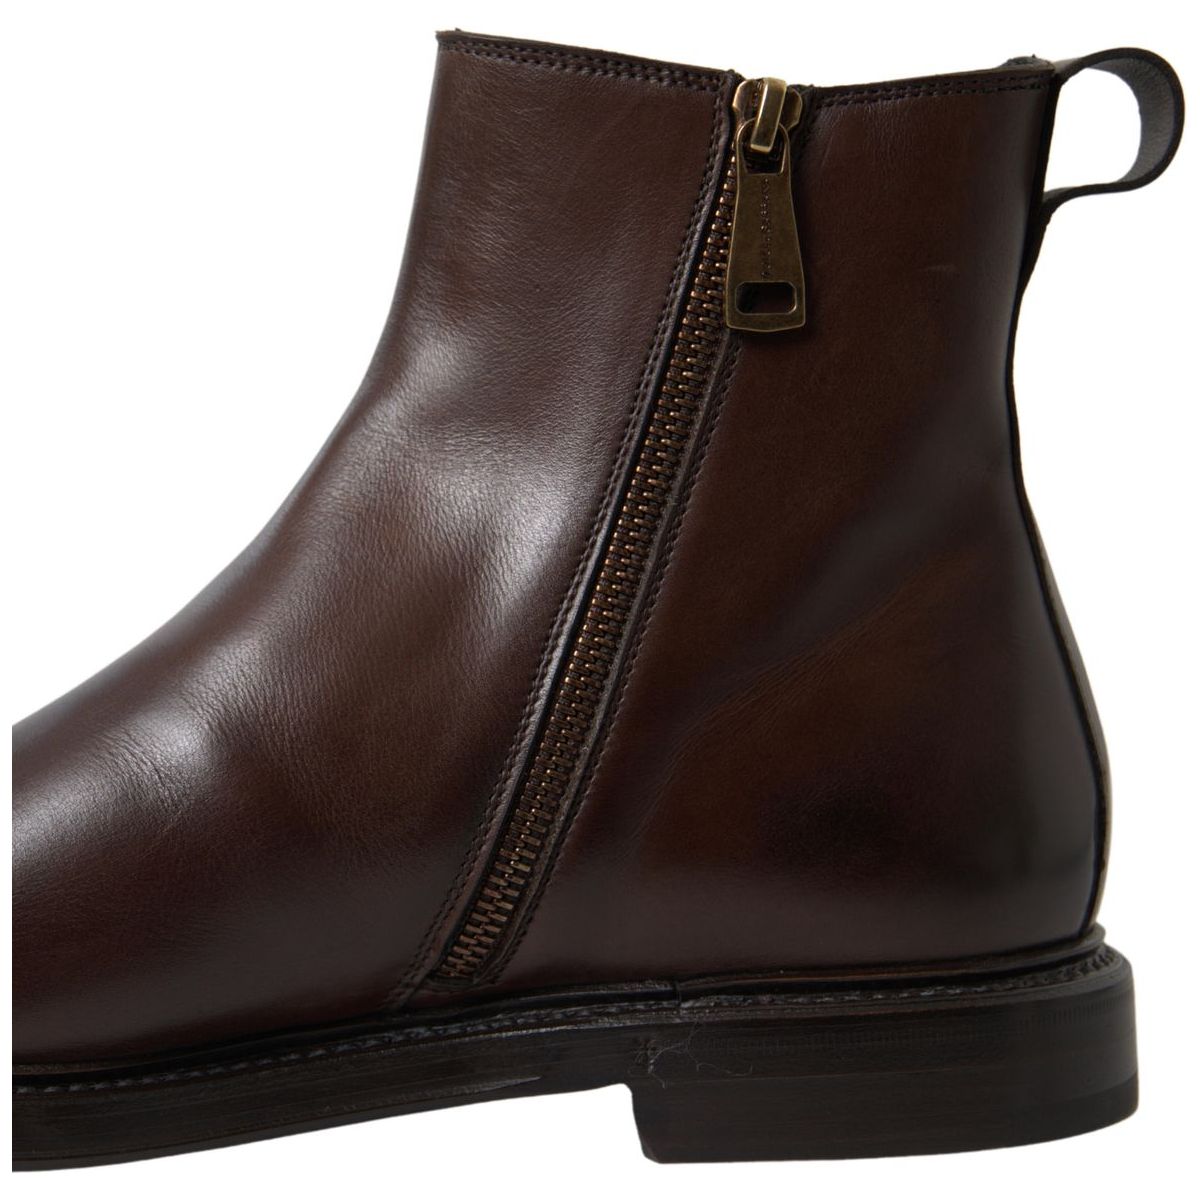 Dolce & Gabbana Elegant Leather Chelsea Boots brown-leather-chelsea-mens-boots-shoes 465A8389-bd48ed15-b04.jpg